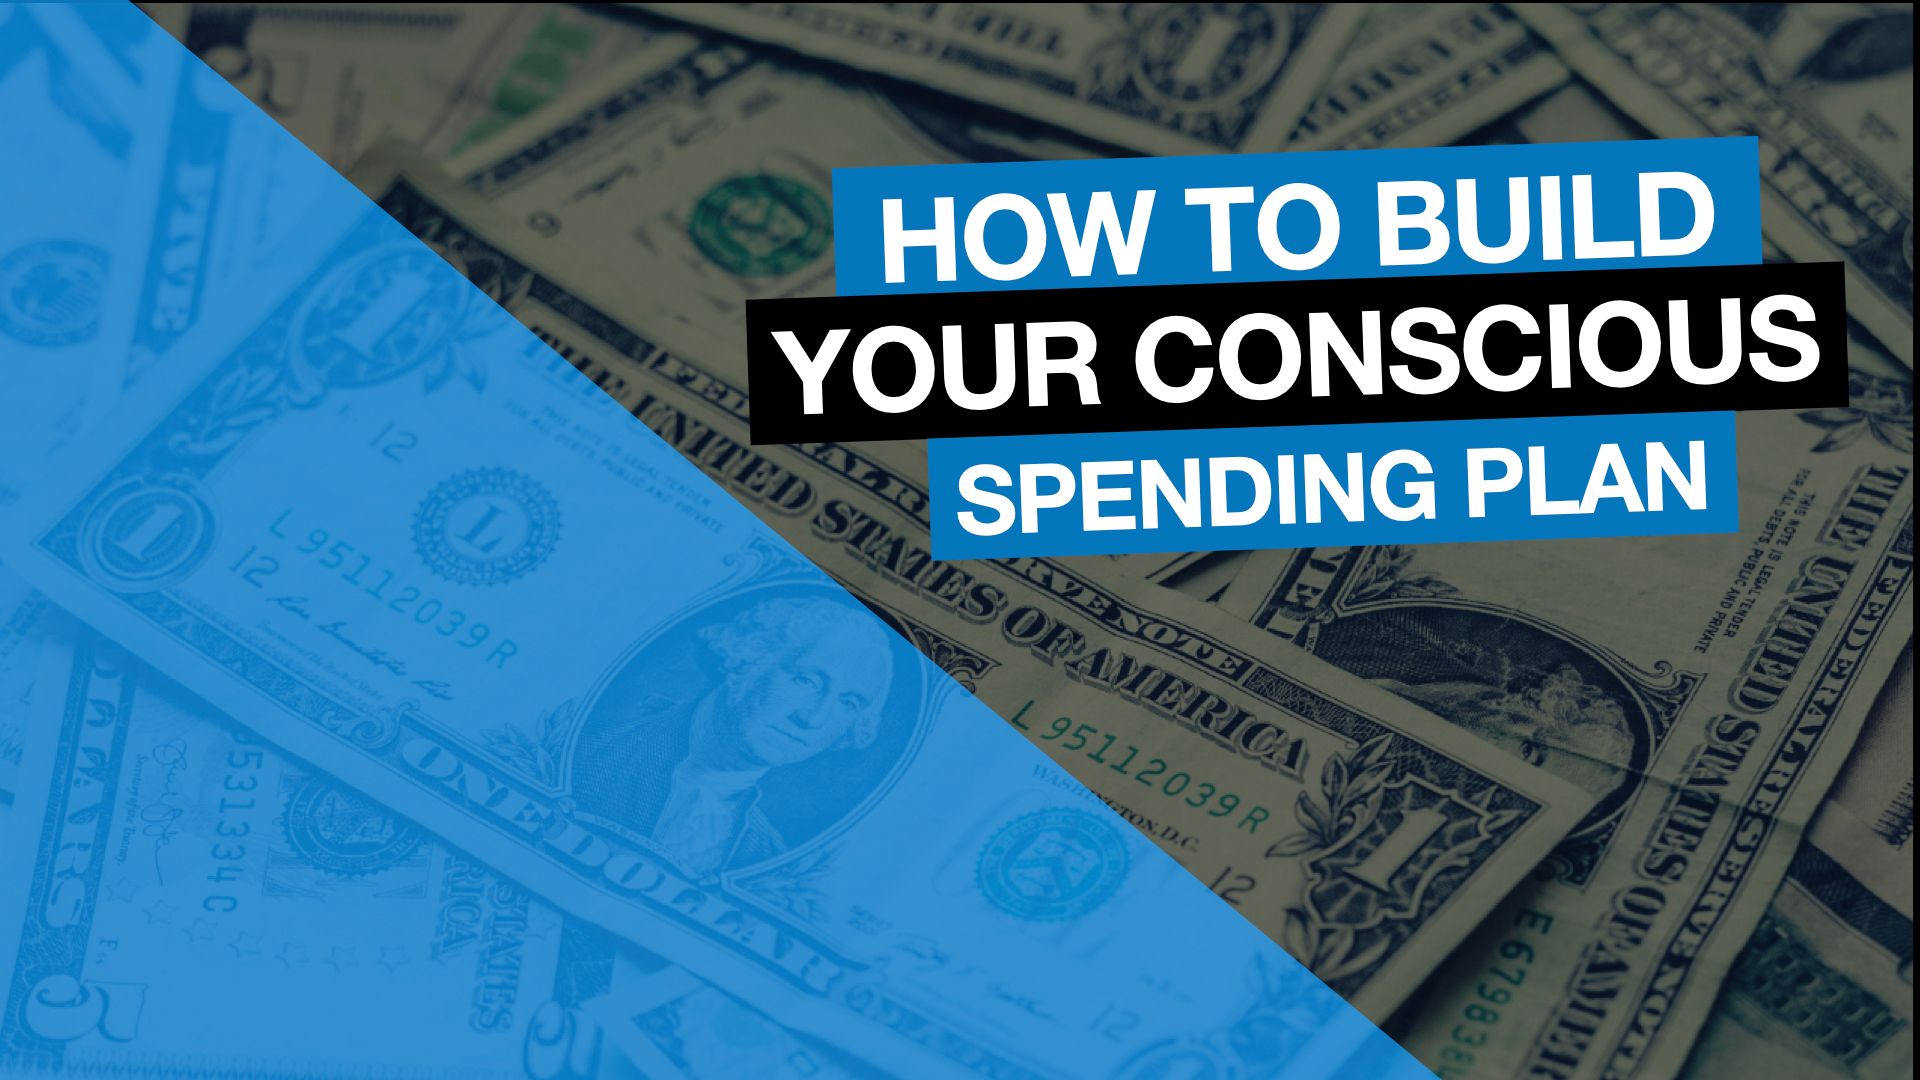 How to Build Your Conscious Spending Plan